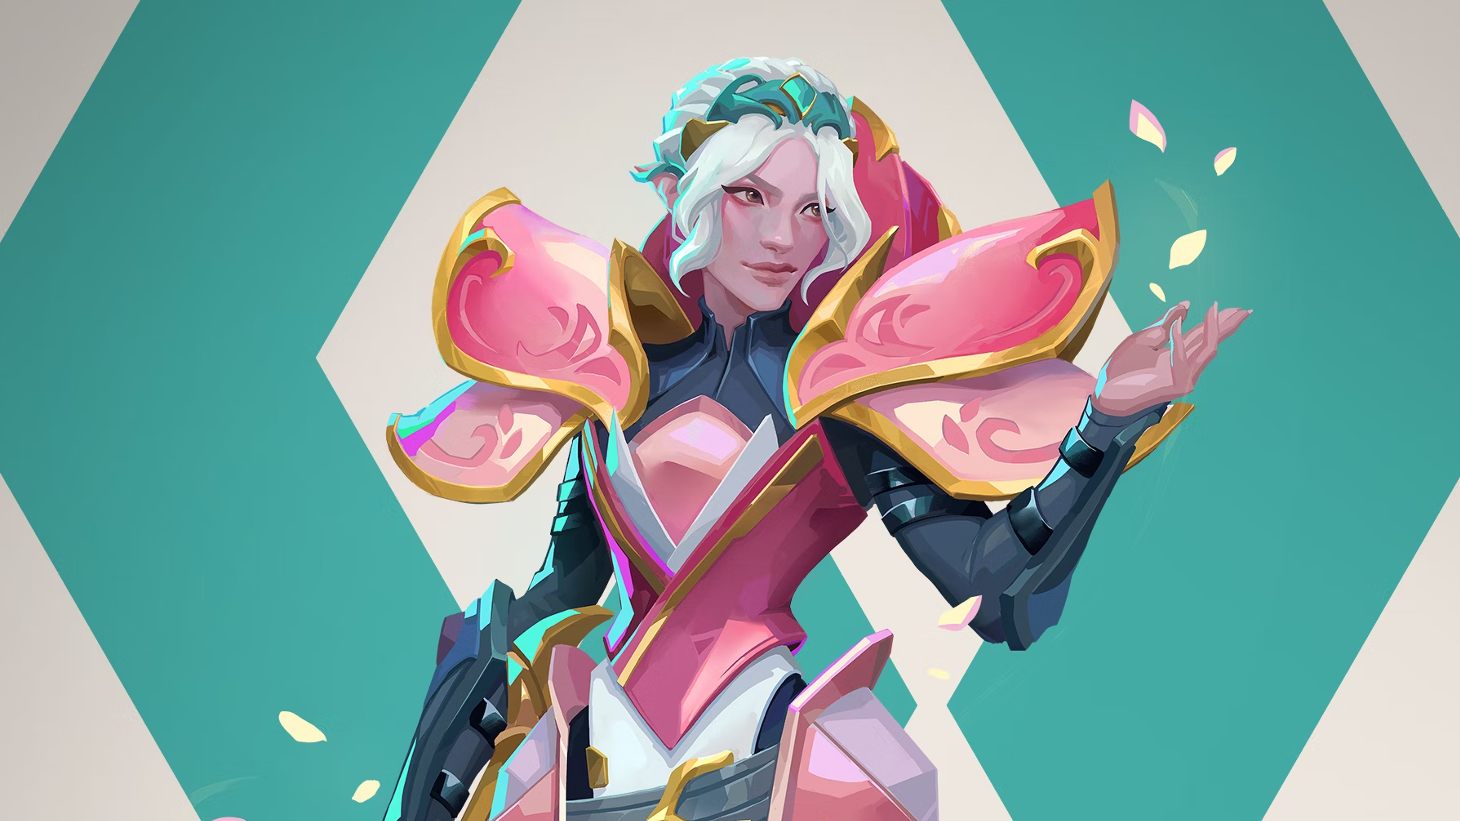 Evercore Heroes Characters: Lotus can be seen